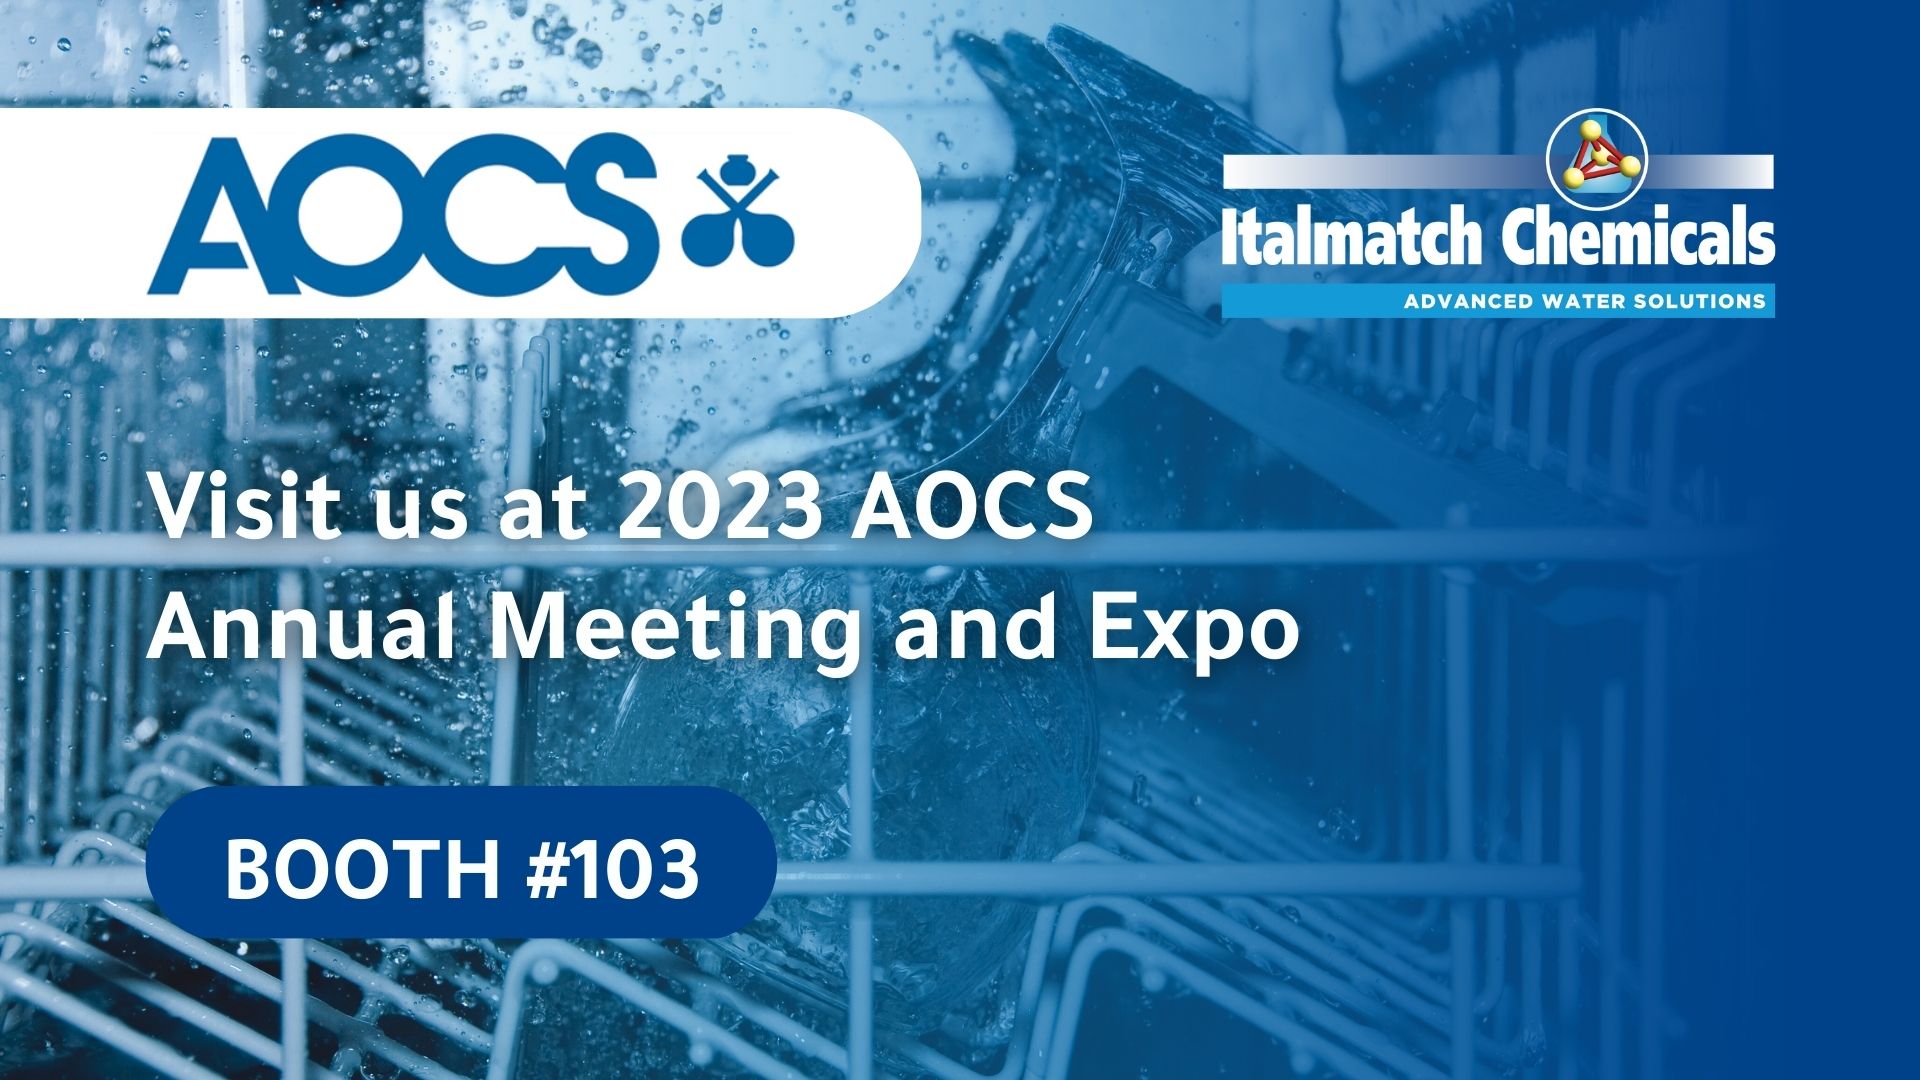 2023 AOCS Annual Meeting & Expo_Italmatch Chemicals Advanced Water Solutions